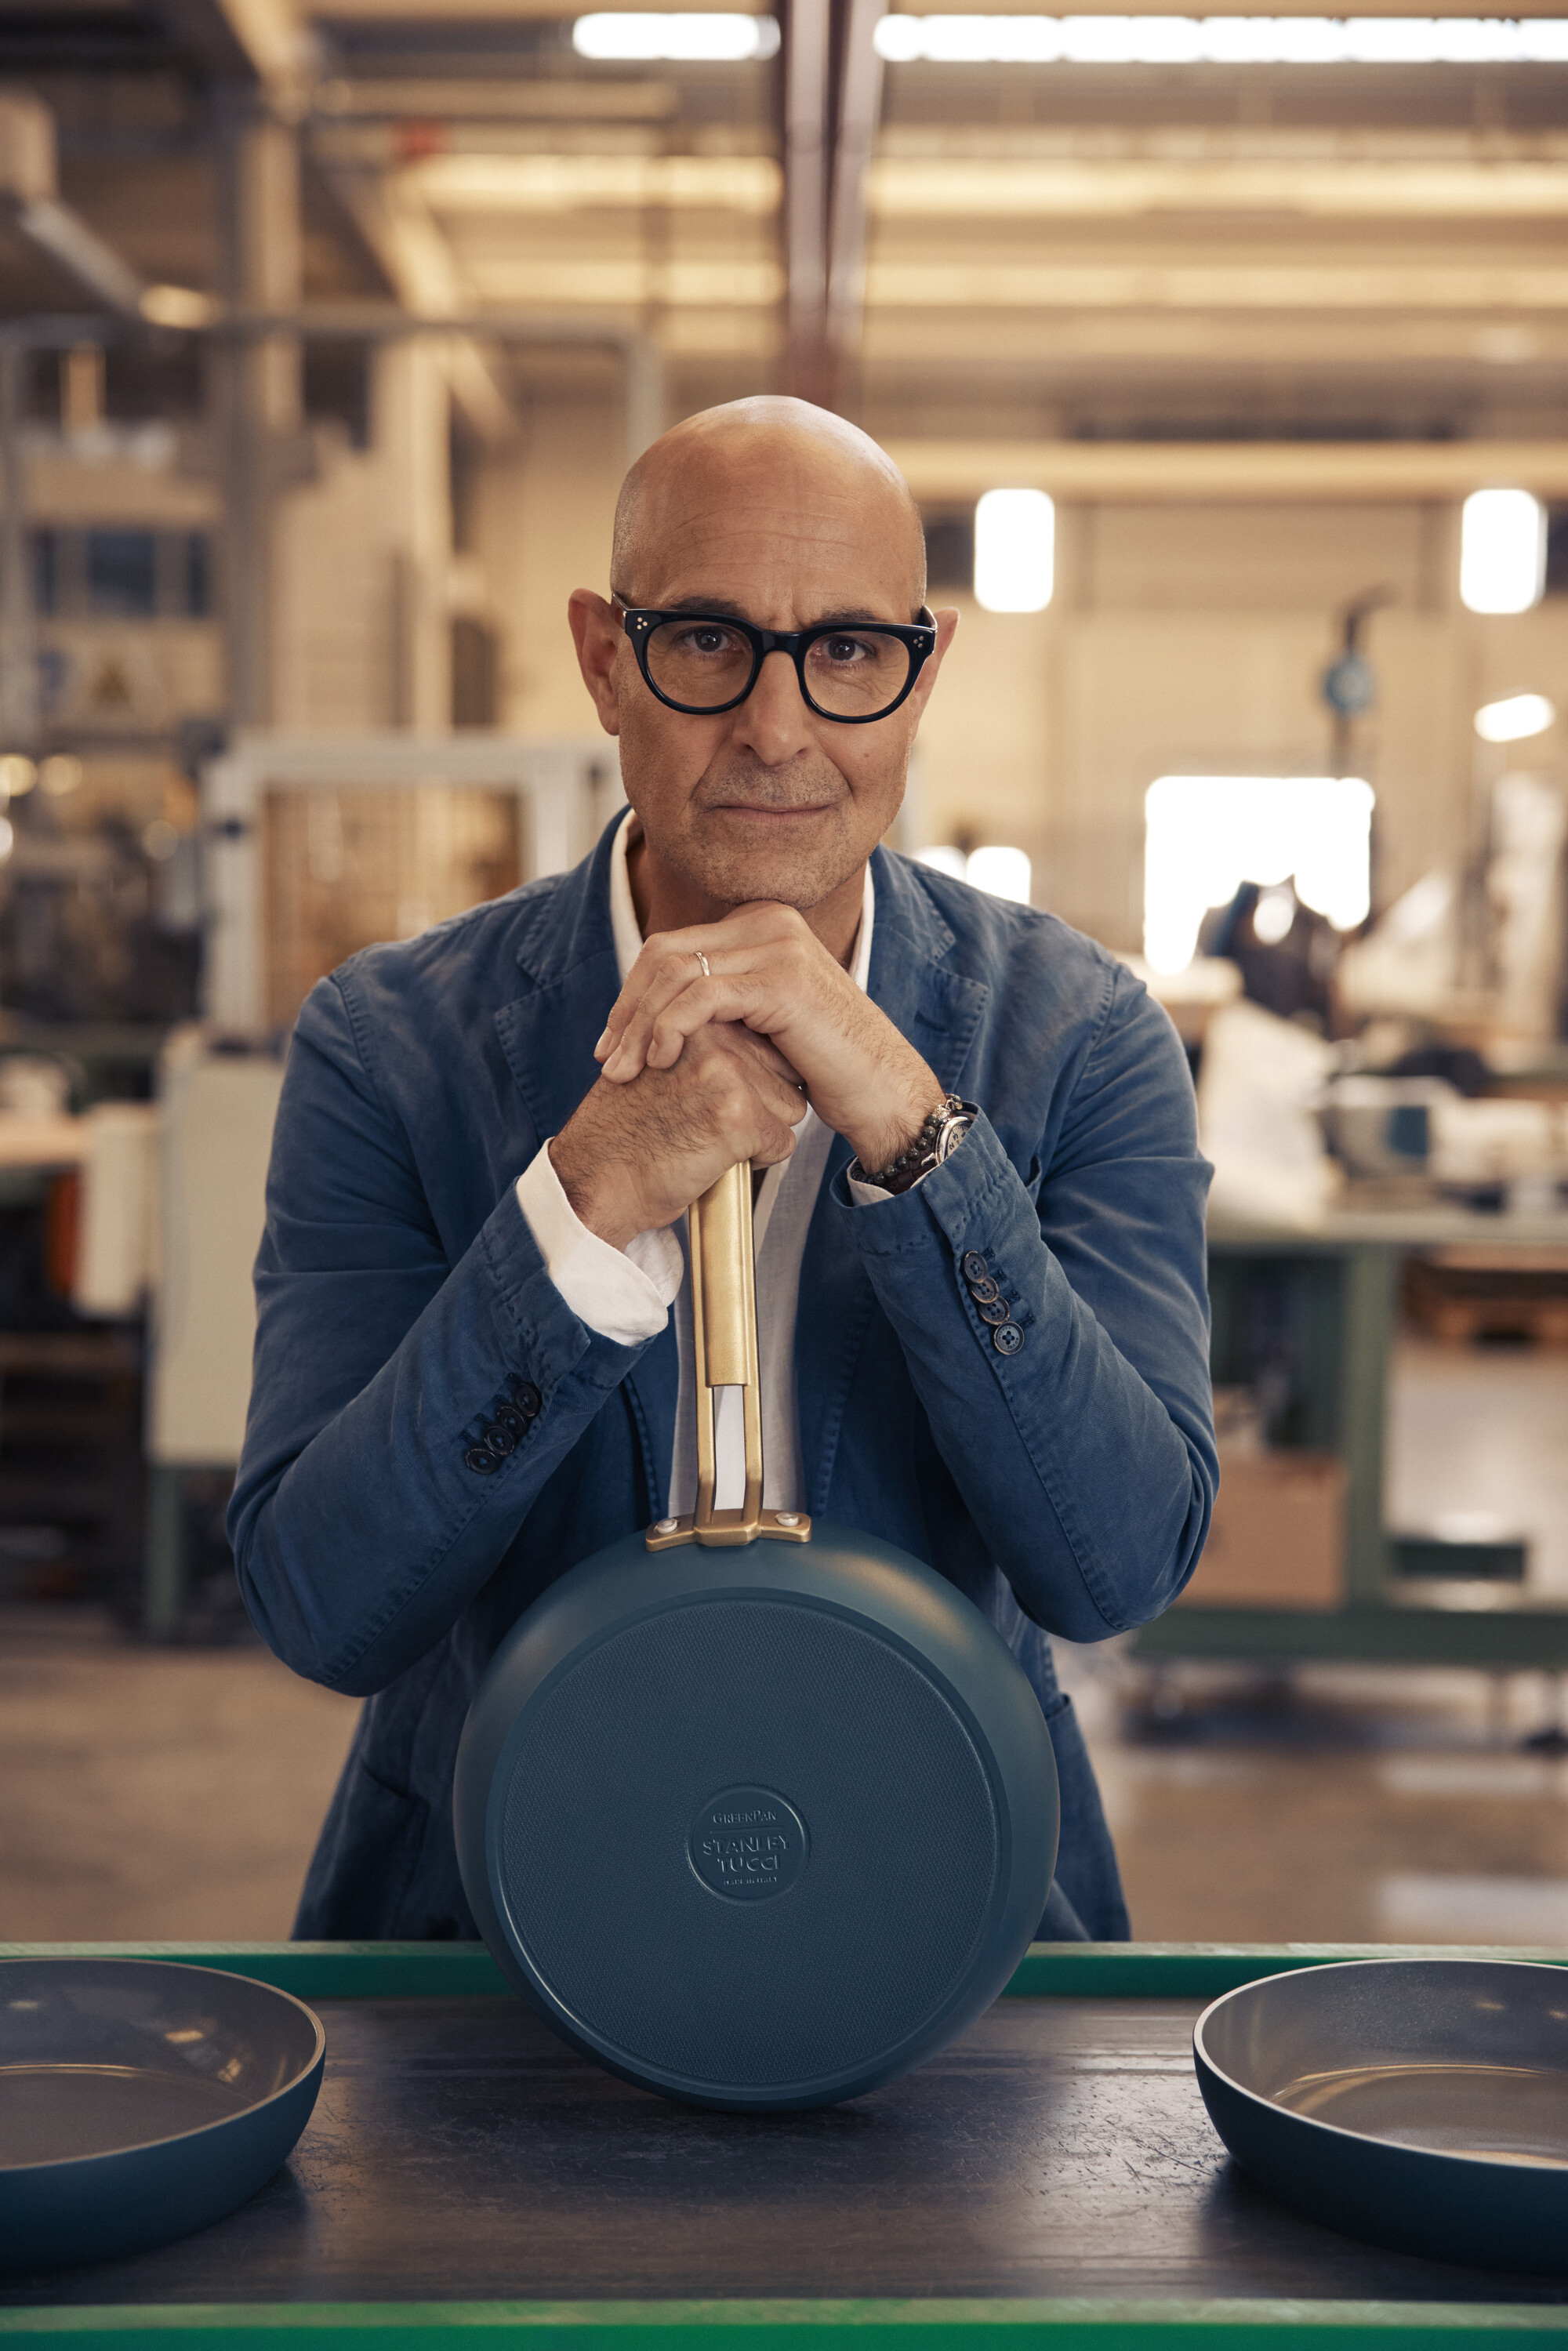 GREENPAN™ LAUNCHES COOKWARE COLLECTION WITH STANLEY TUCCI SOLD EXCLUSIVELY  AT WILLIAMS SONOMA